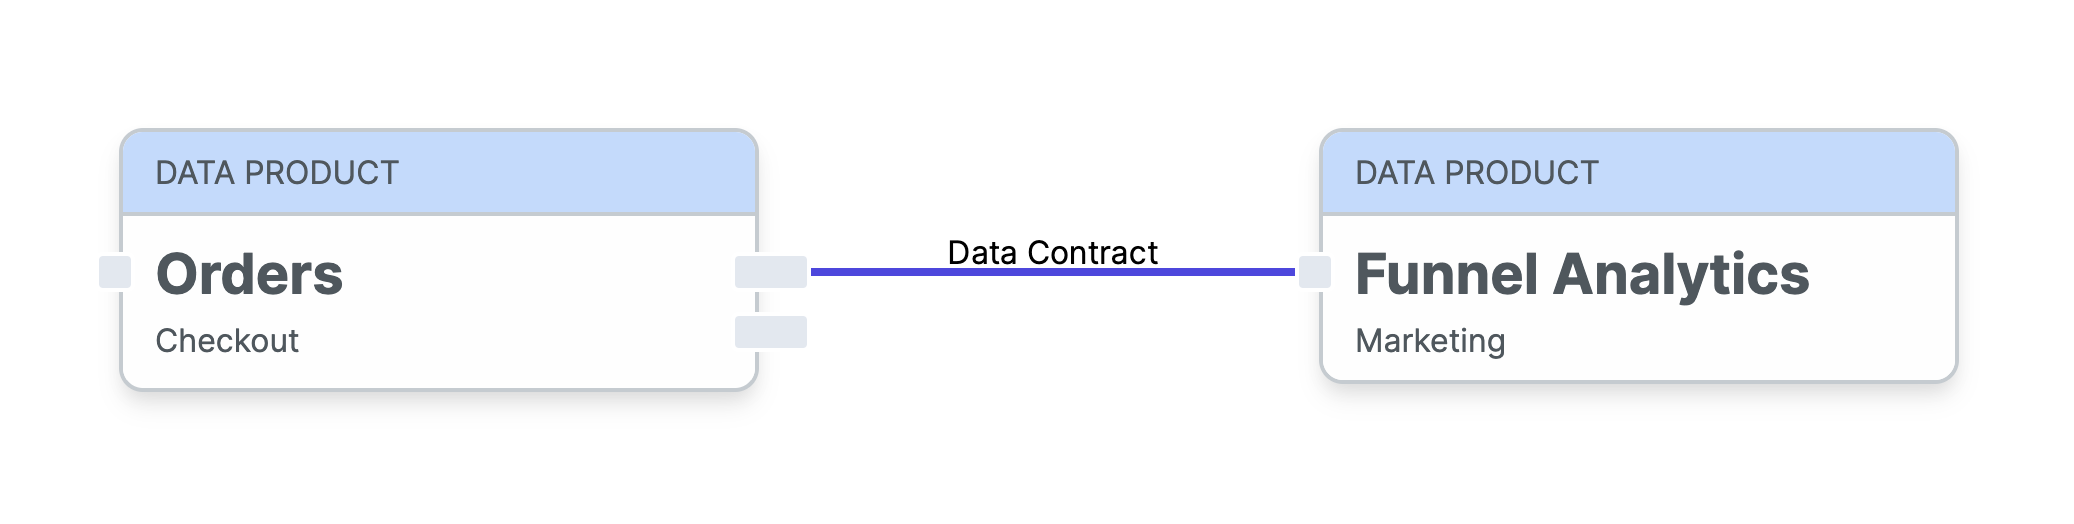 A data contract that connects two data products